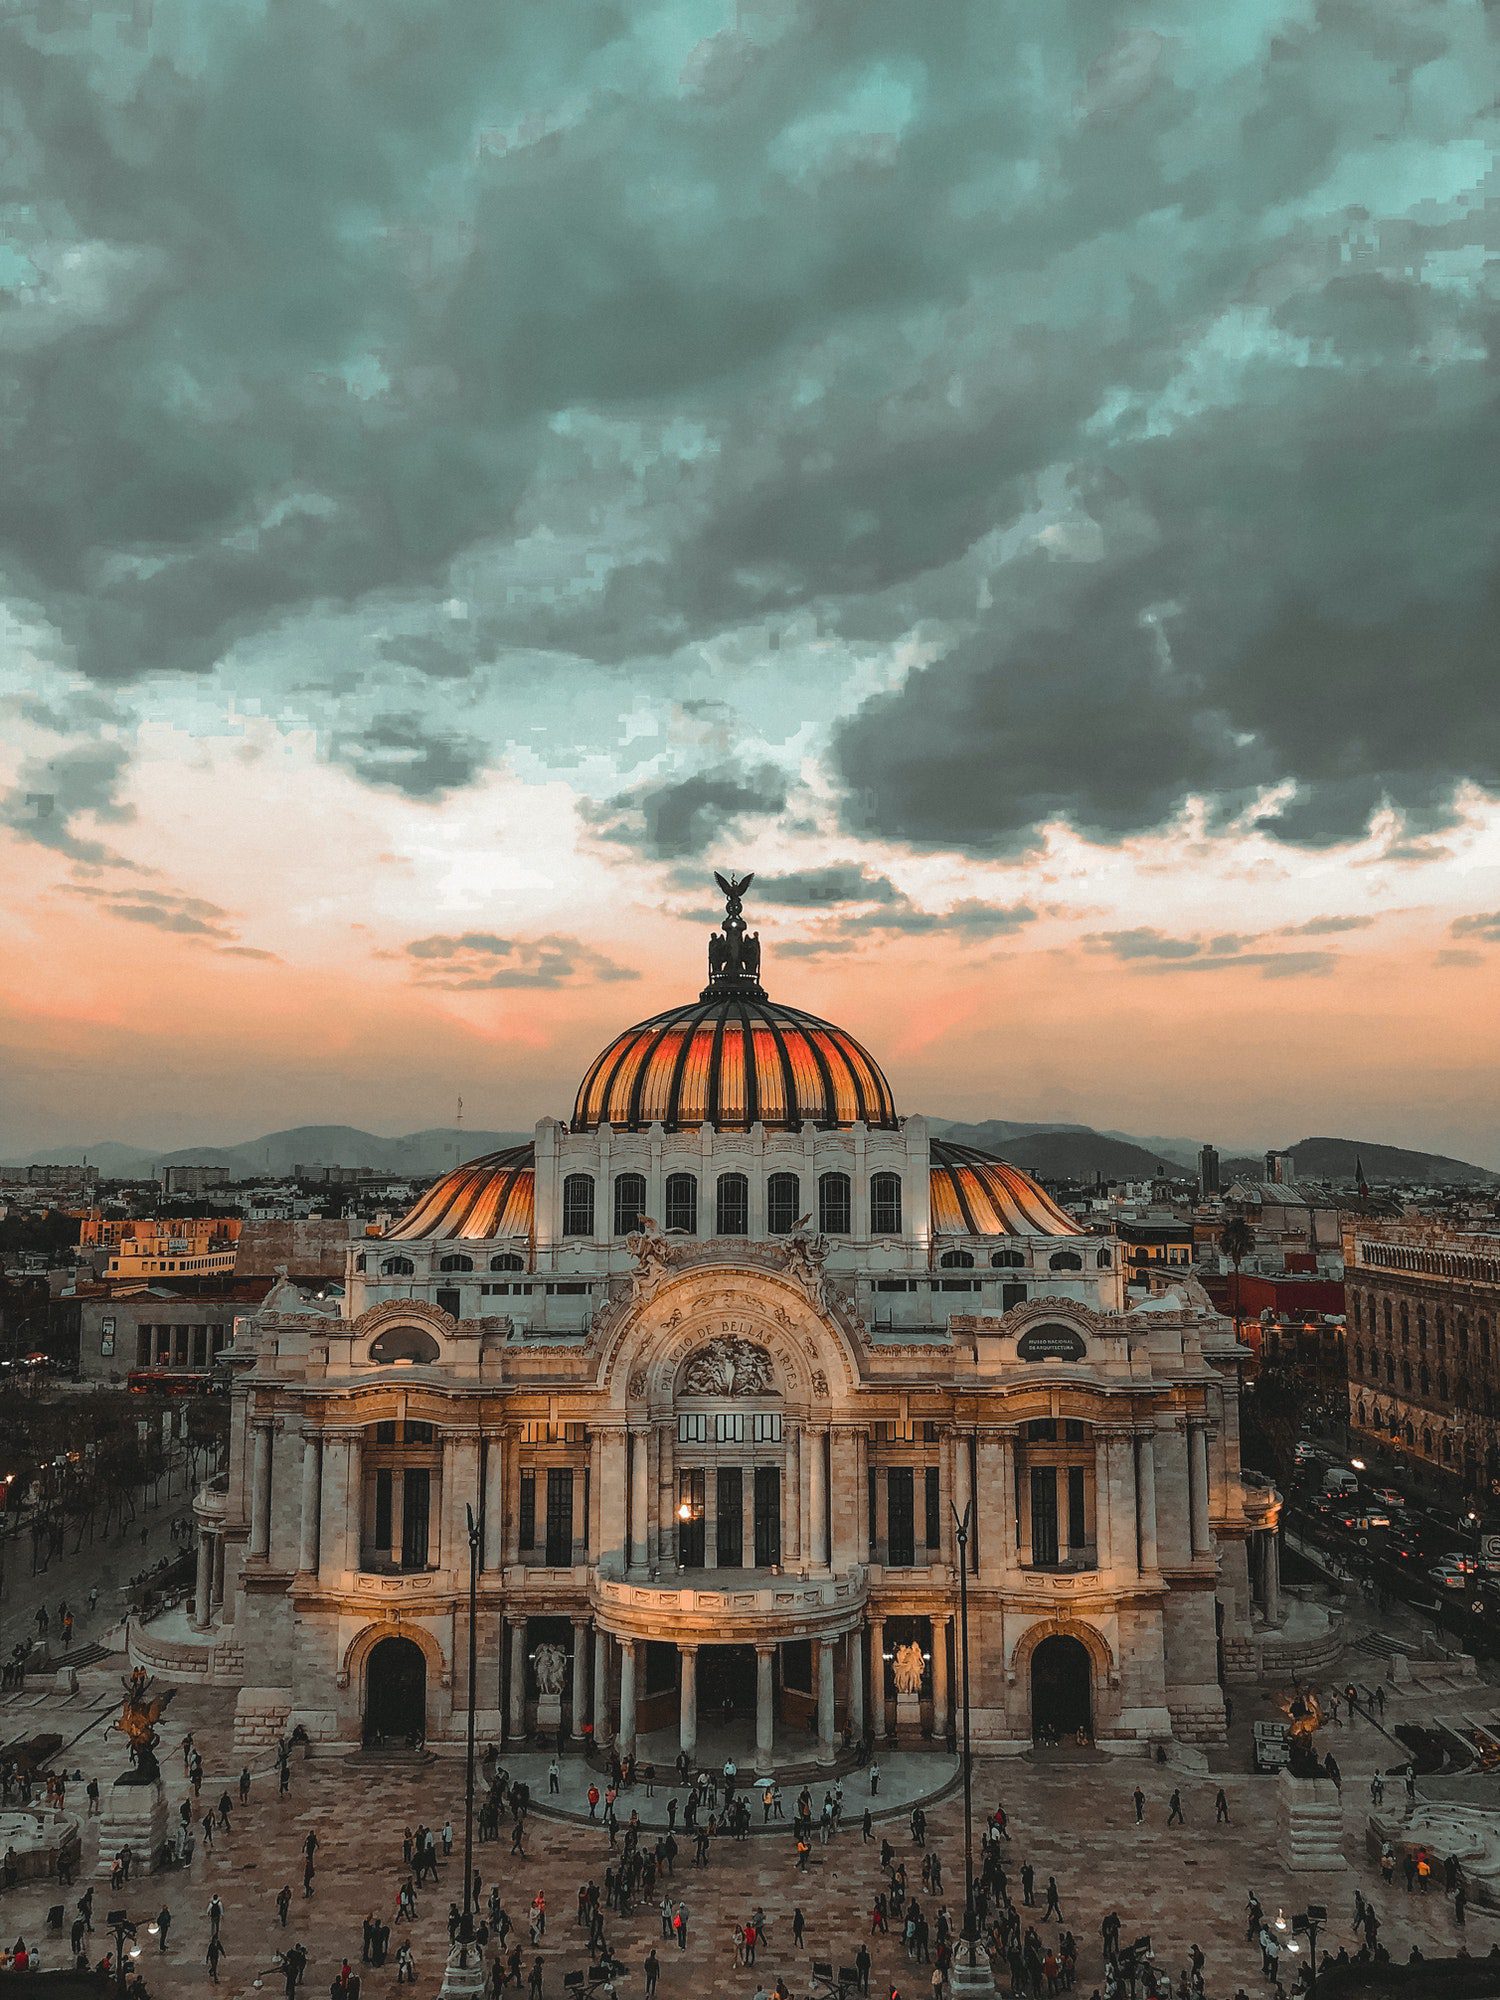 An incredible museum in Mexico City named Bellas Artes